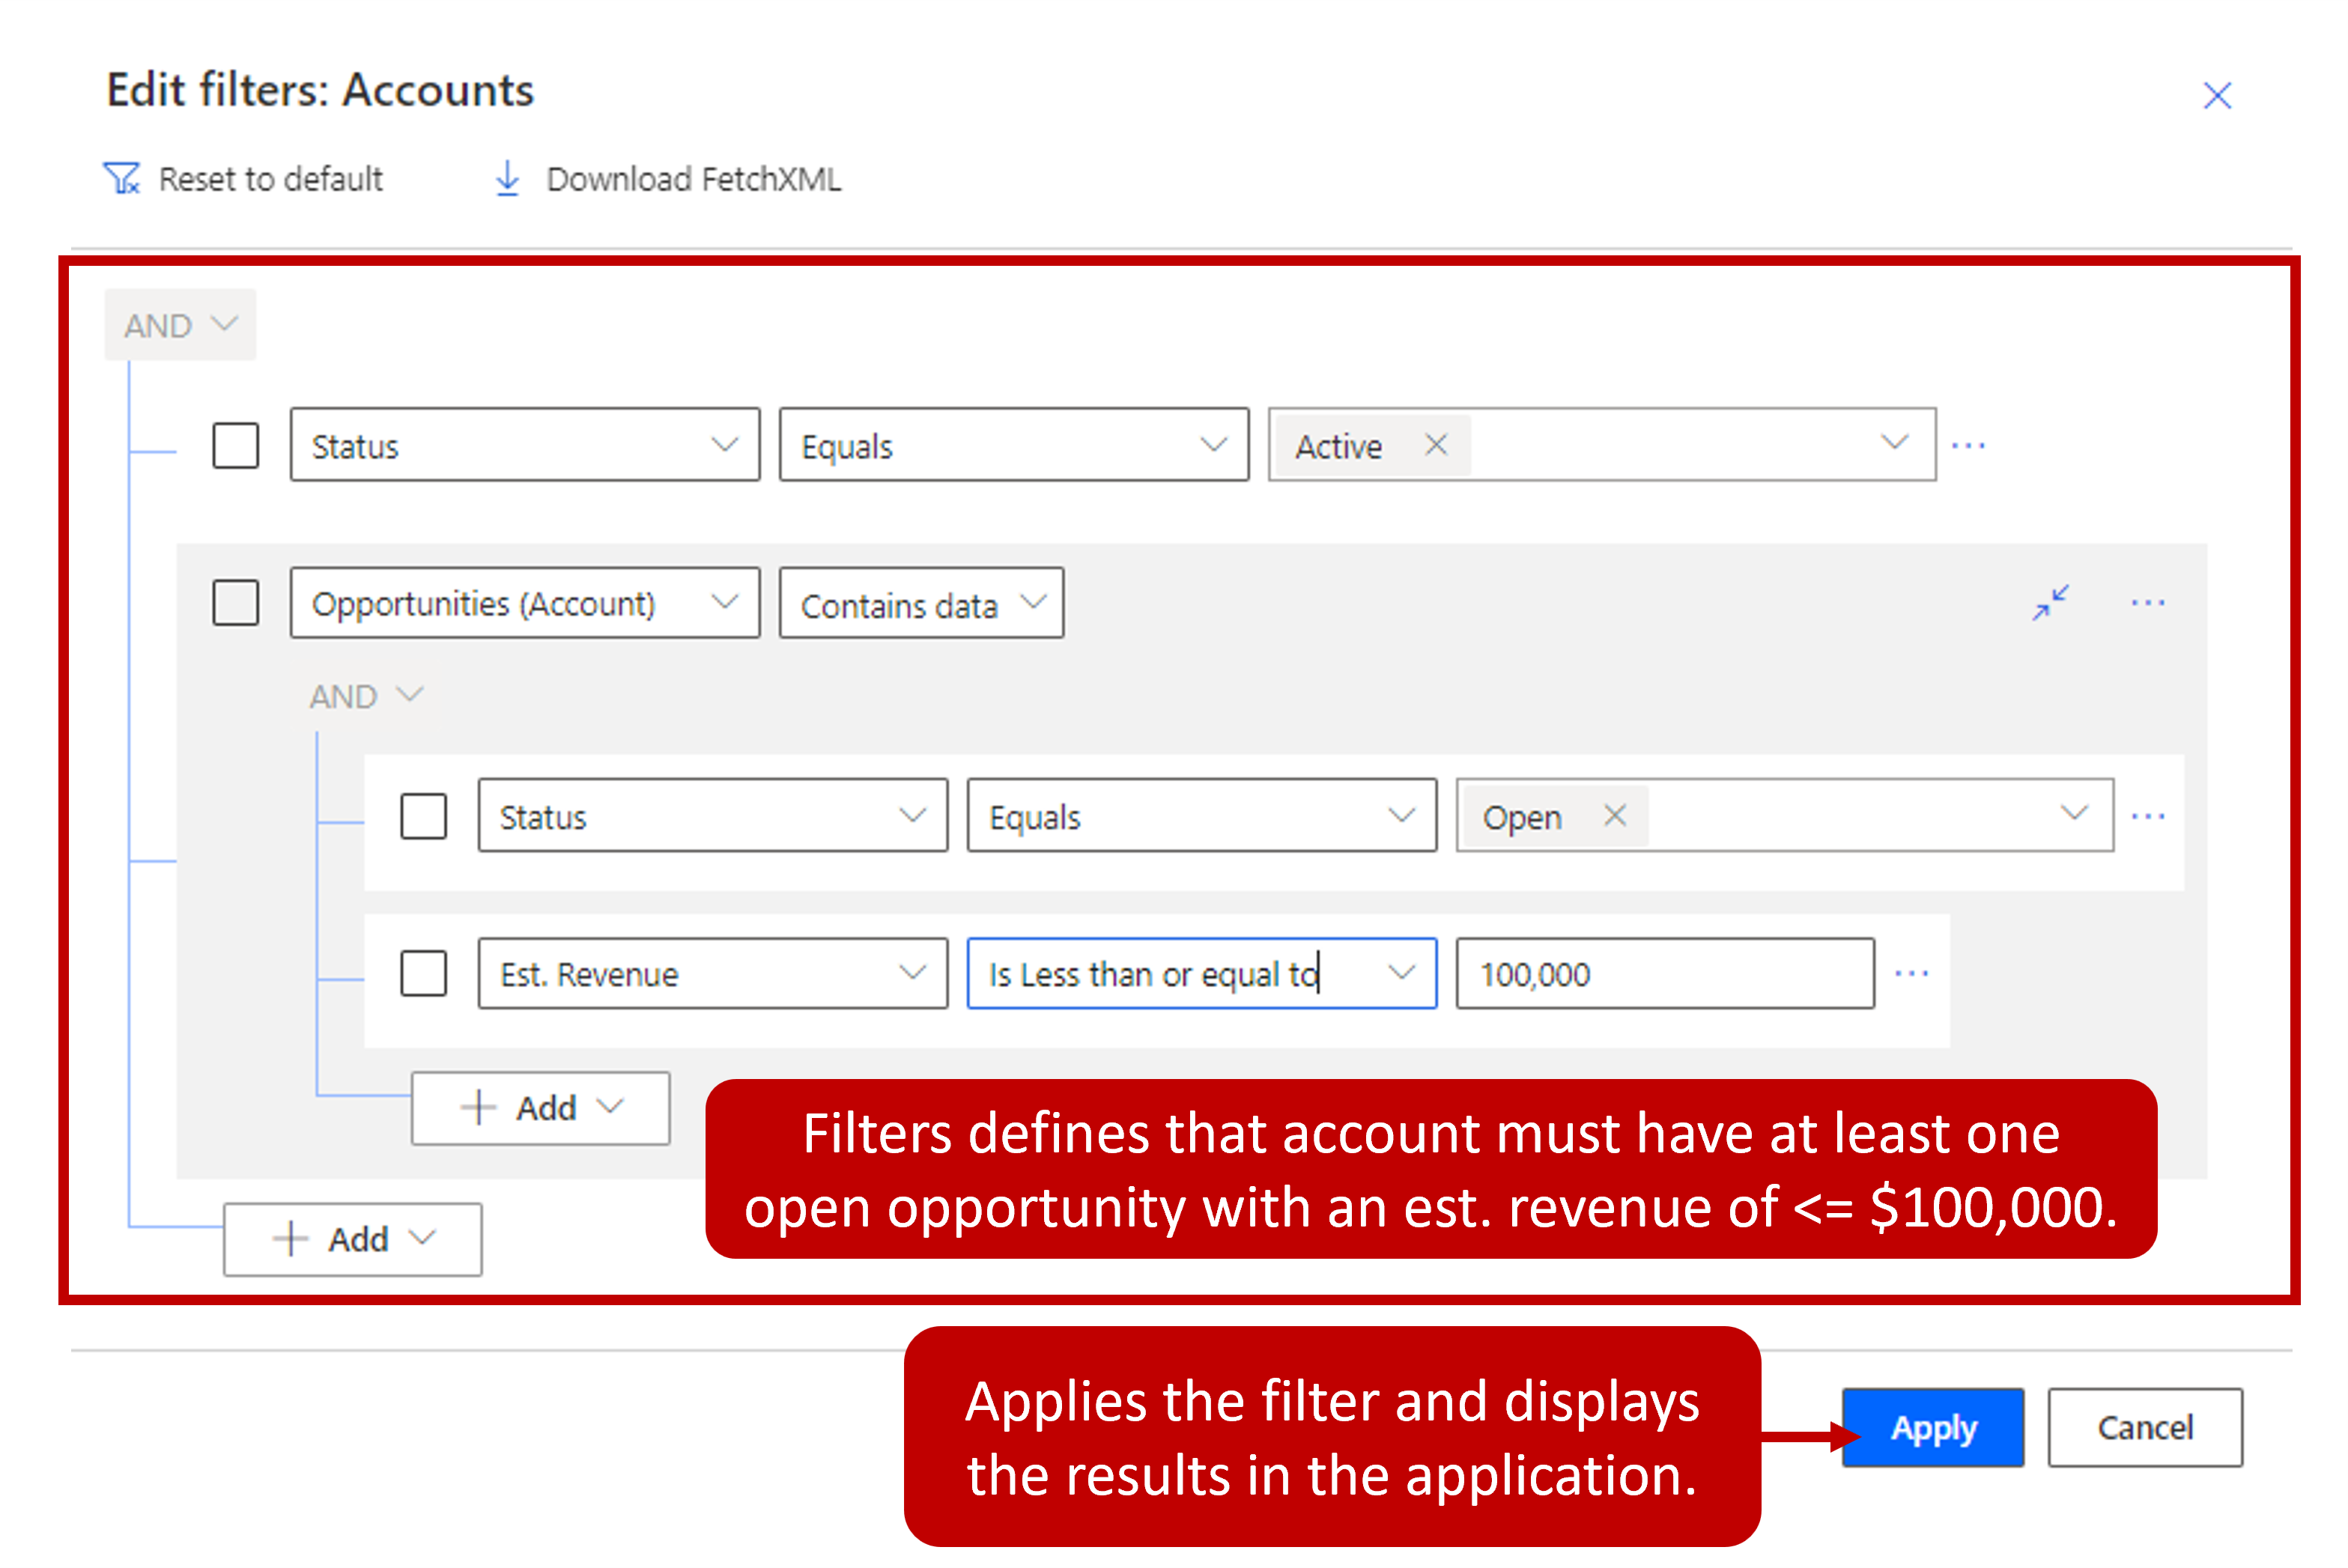 Filter criteria example highlights the Results button, which runs the query and populates the results. Also the Details button, which makes the filter criteria editable. The section showing filter details that define accounts that have at least one open opportunity with and estimated revenue of greater than $100,000.